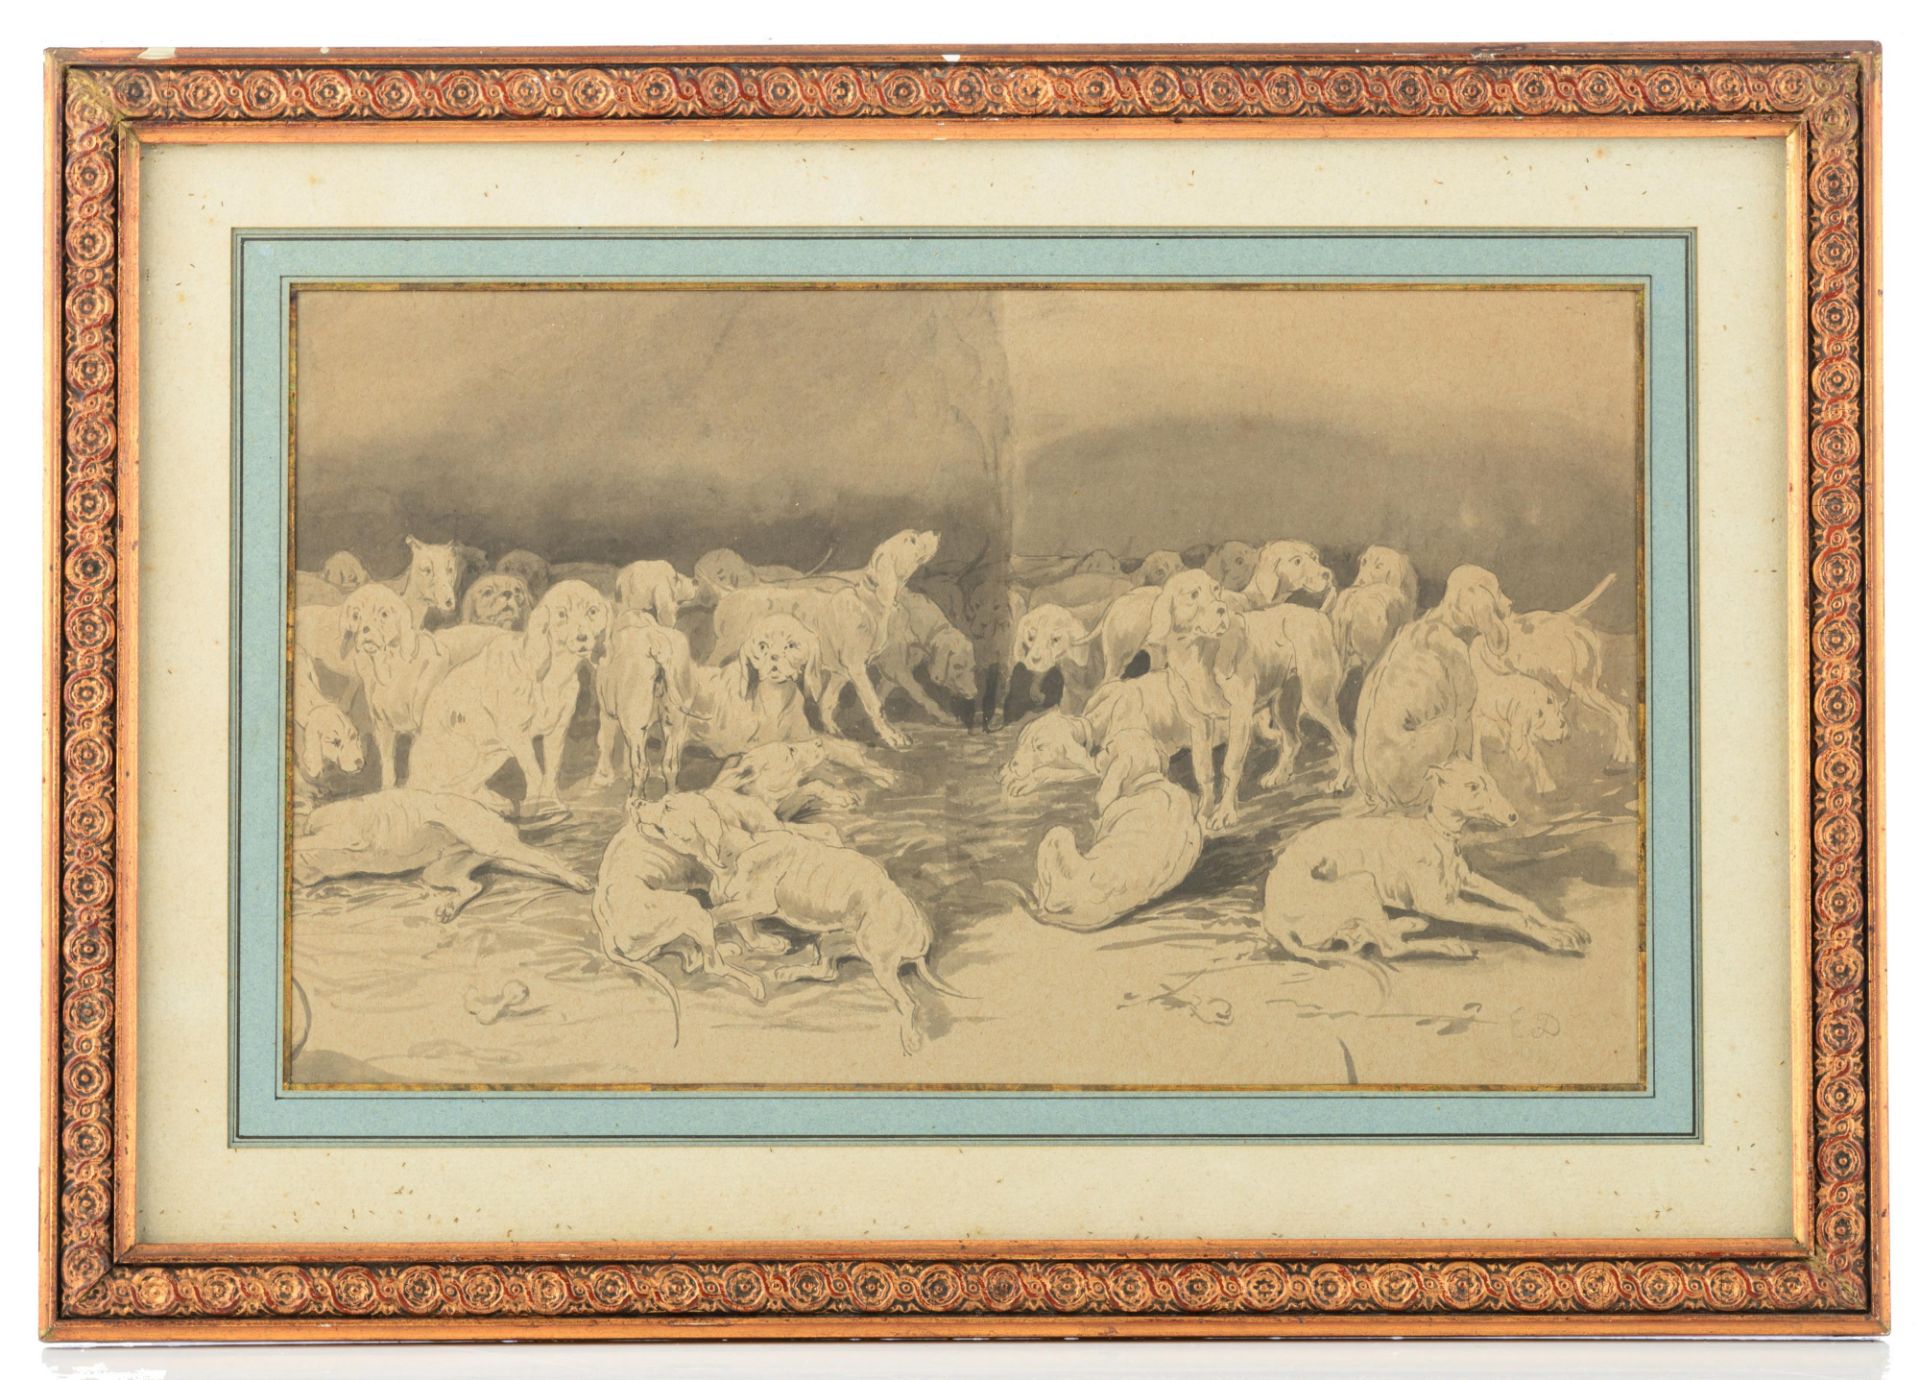 Monogrammed E.D., a pack of dogs, three washed drawings, 21 x 31 - 35 cm - Image 8 of 12